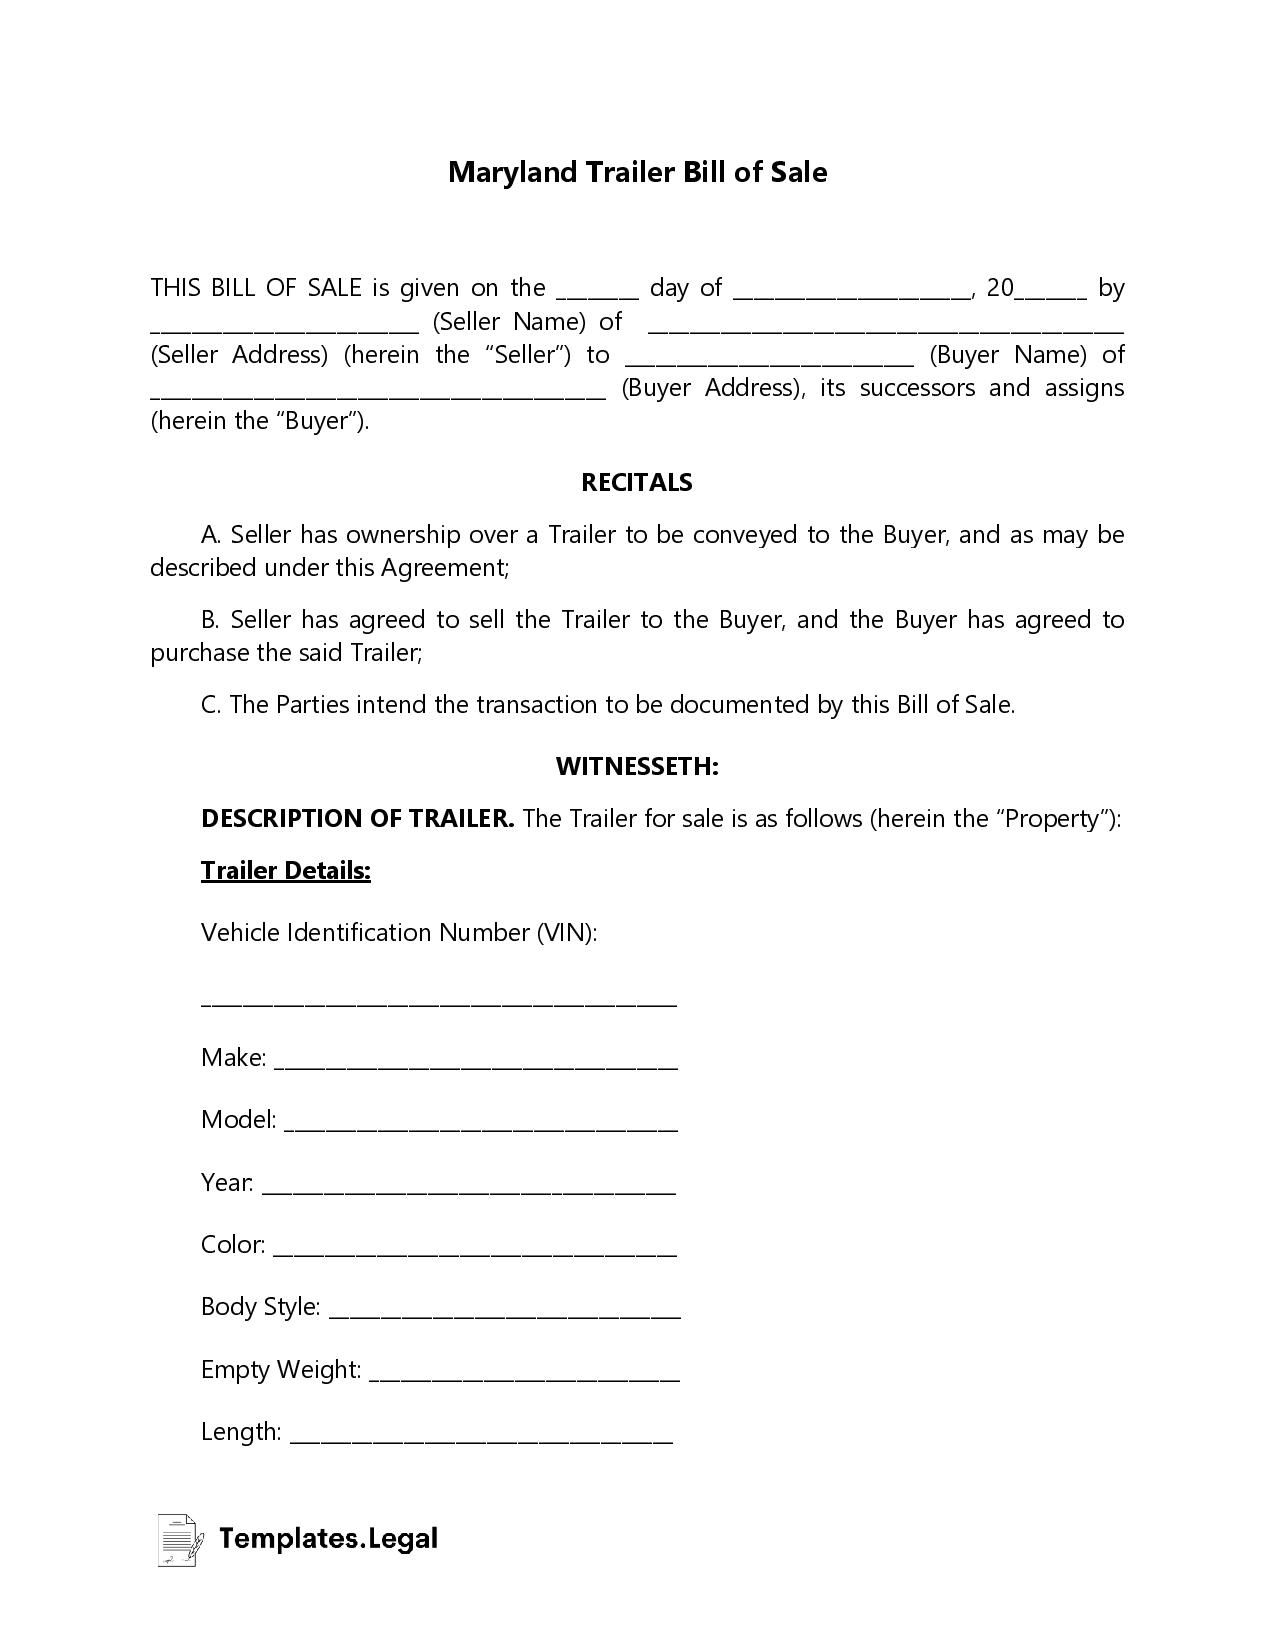 Maryland Trailer Bill of Sale - Templates.Legal